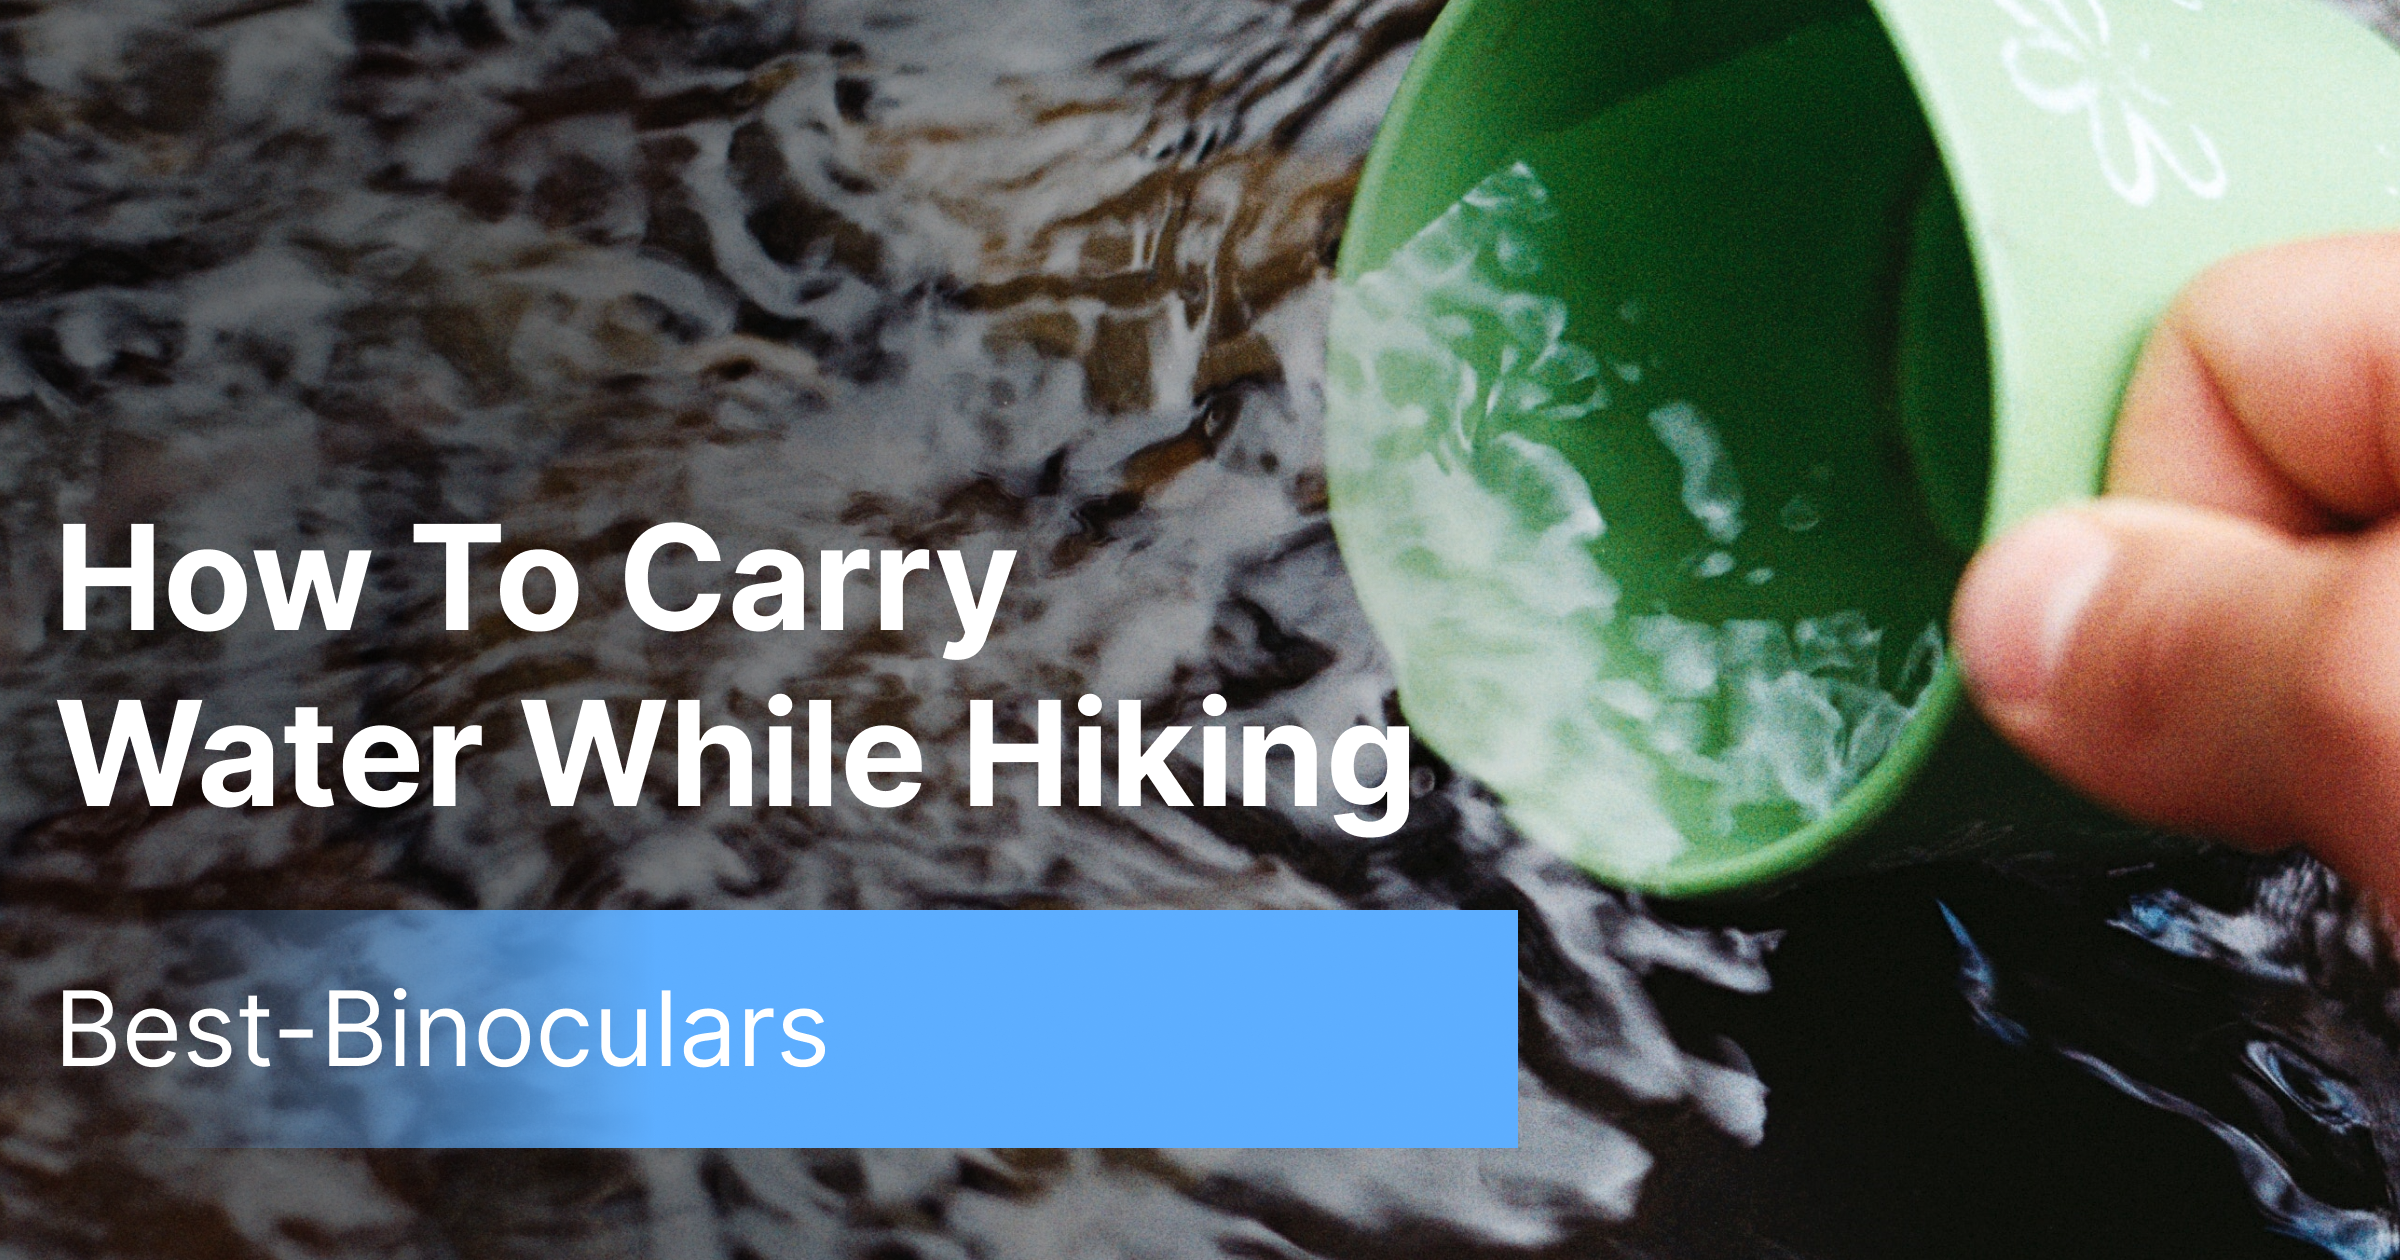 How to carry water while hiking